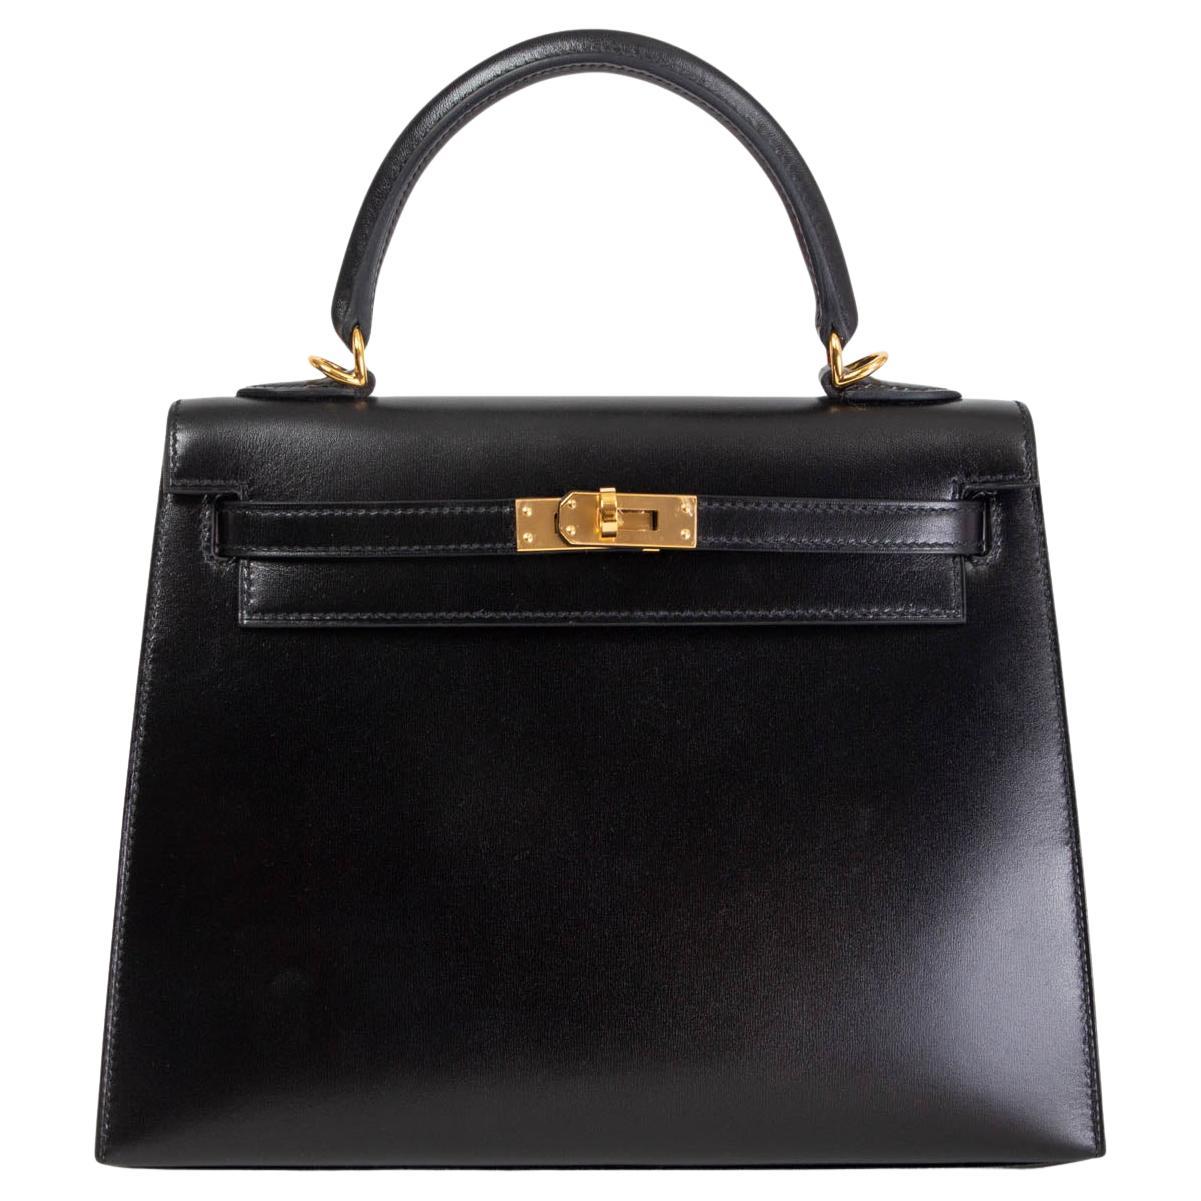 HERMES black Box leather KELLY 25 SELLIER Bag w Gold